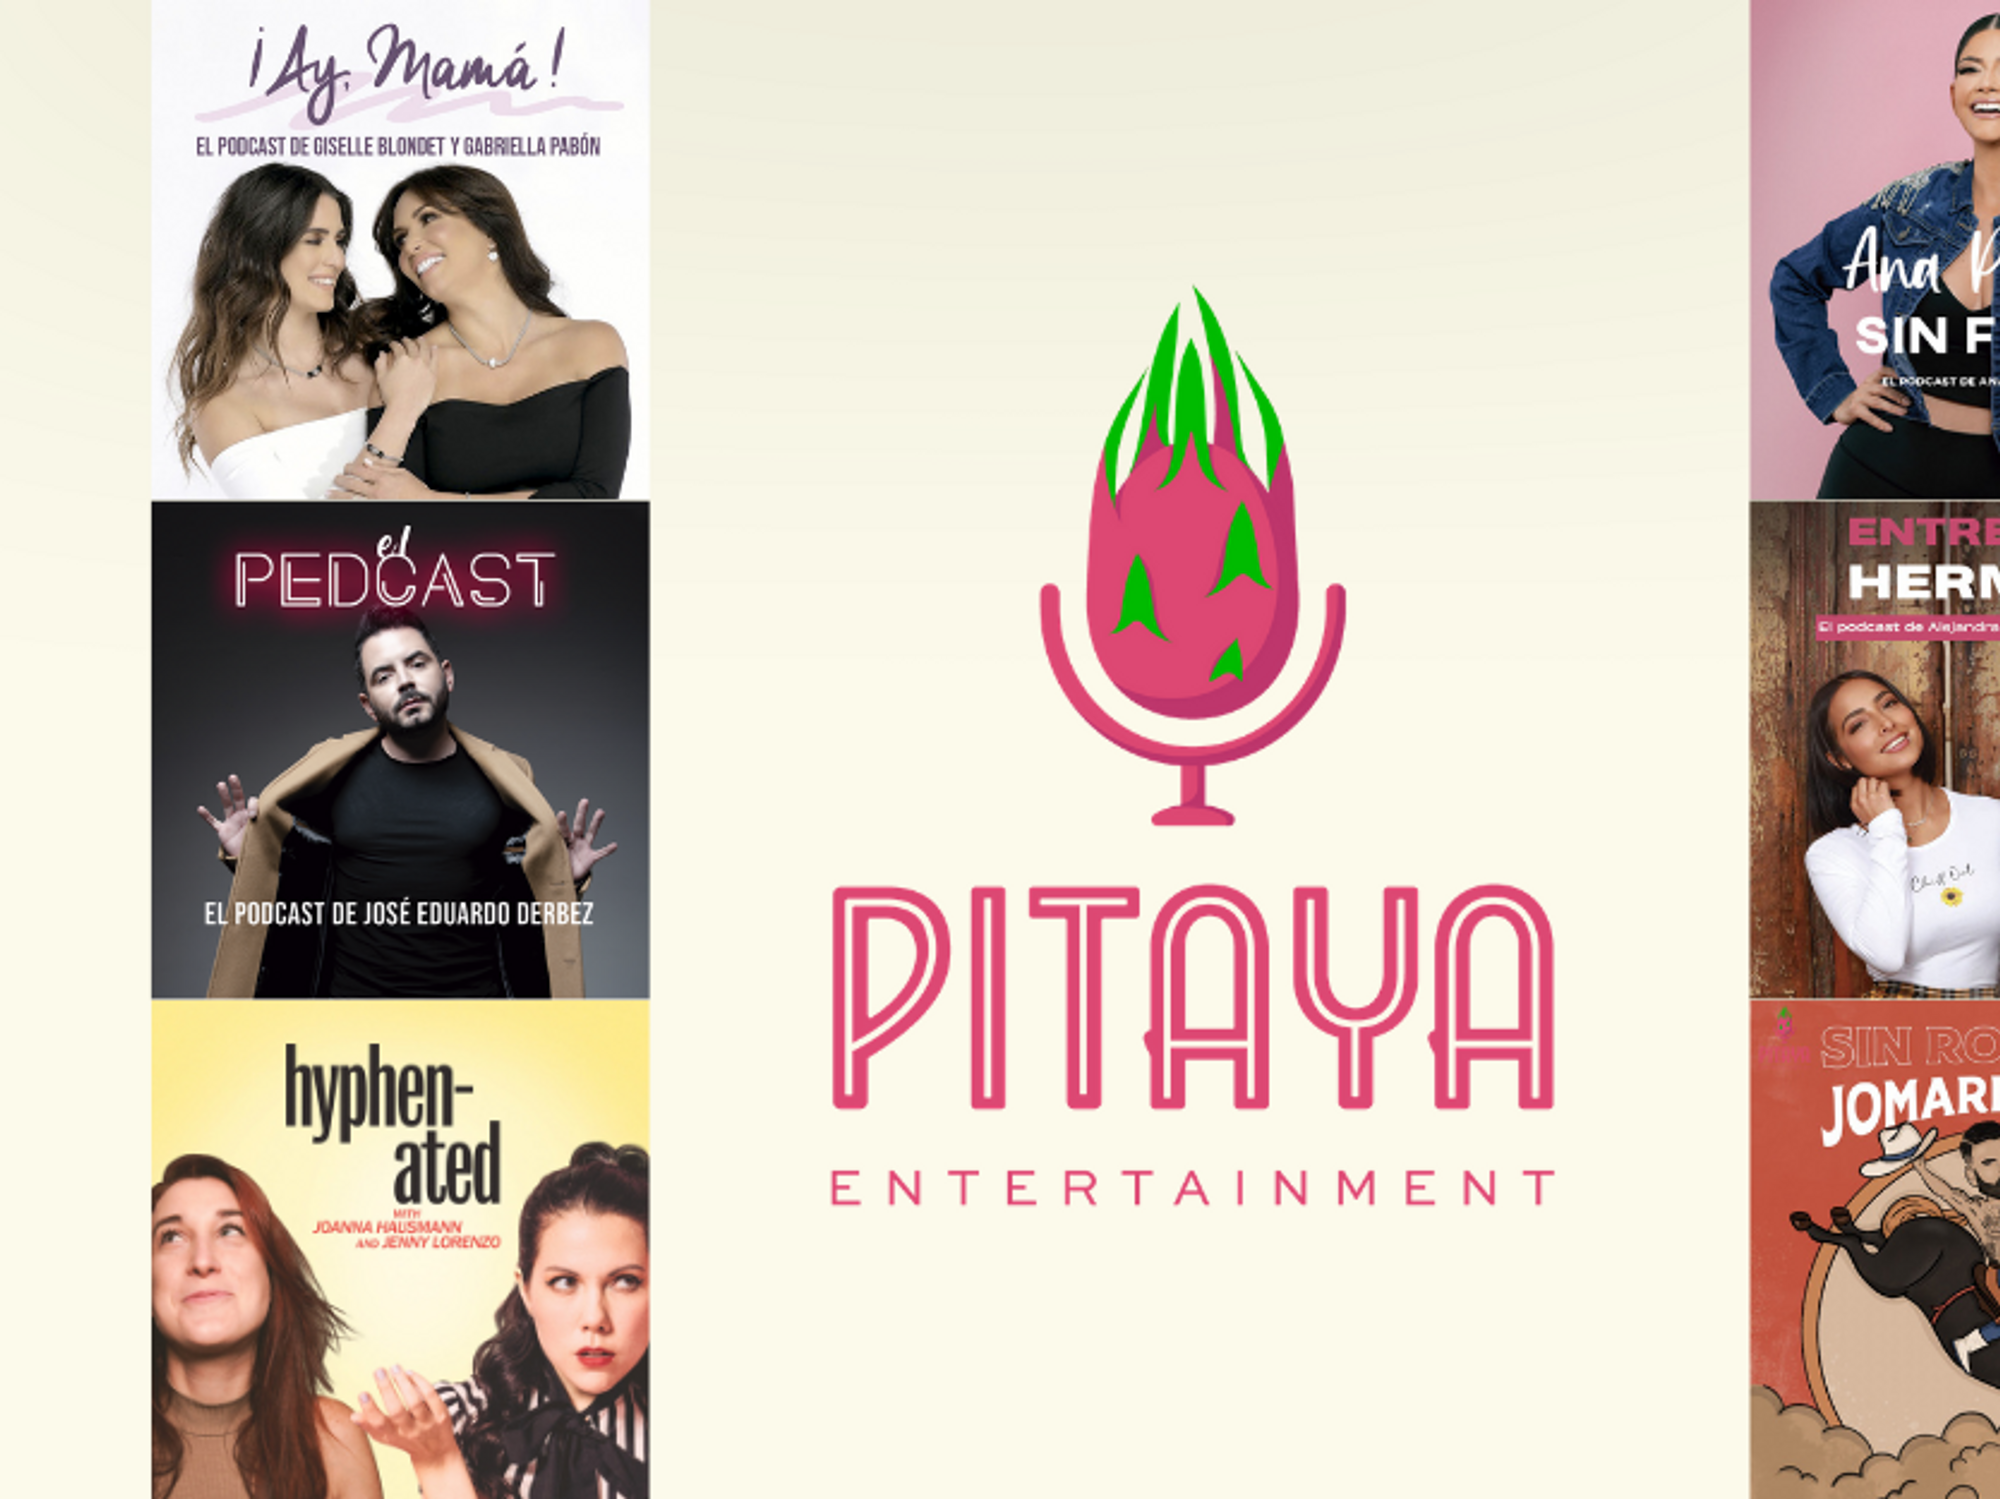 Pitaya Entertainment Bets Latinos Want Podcasts that Speak to their Community